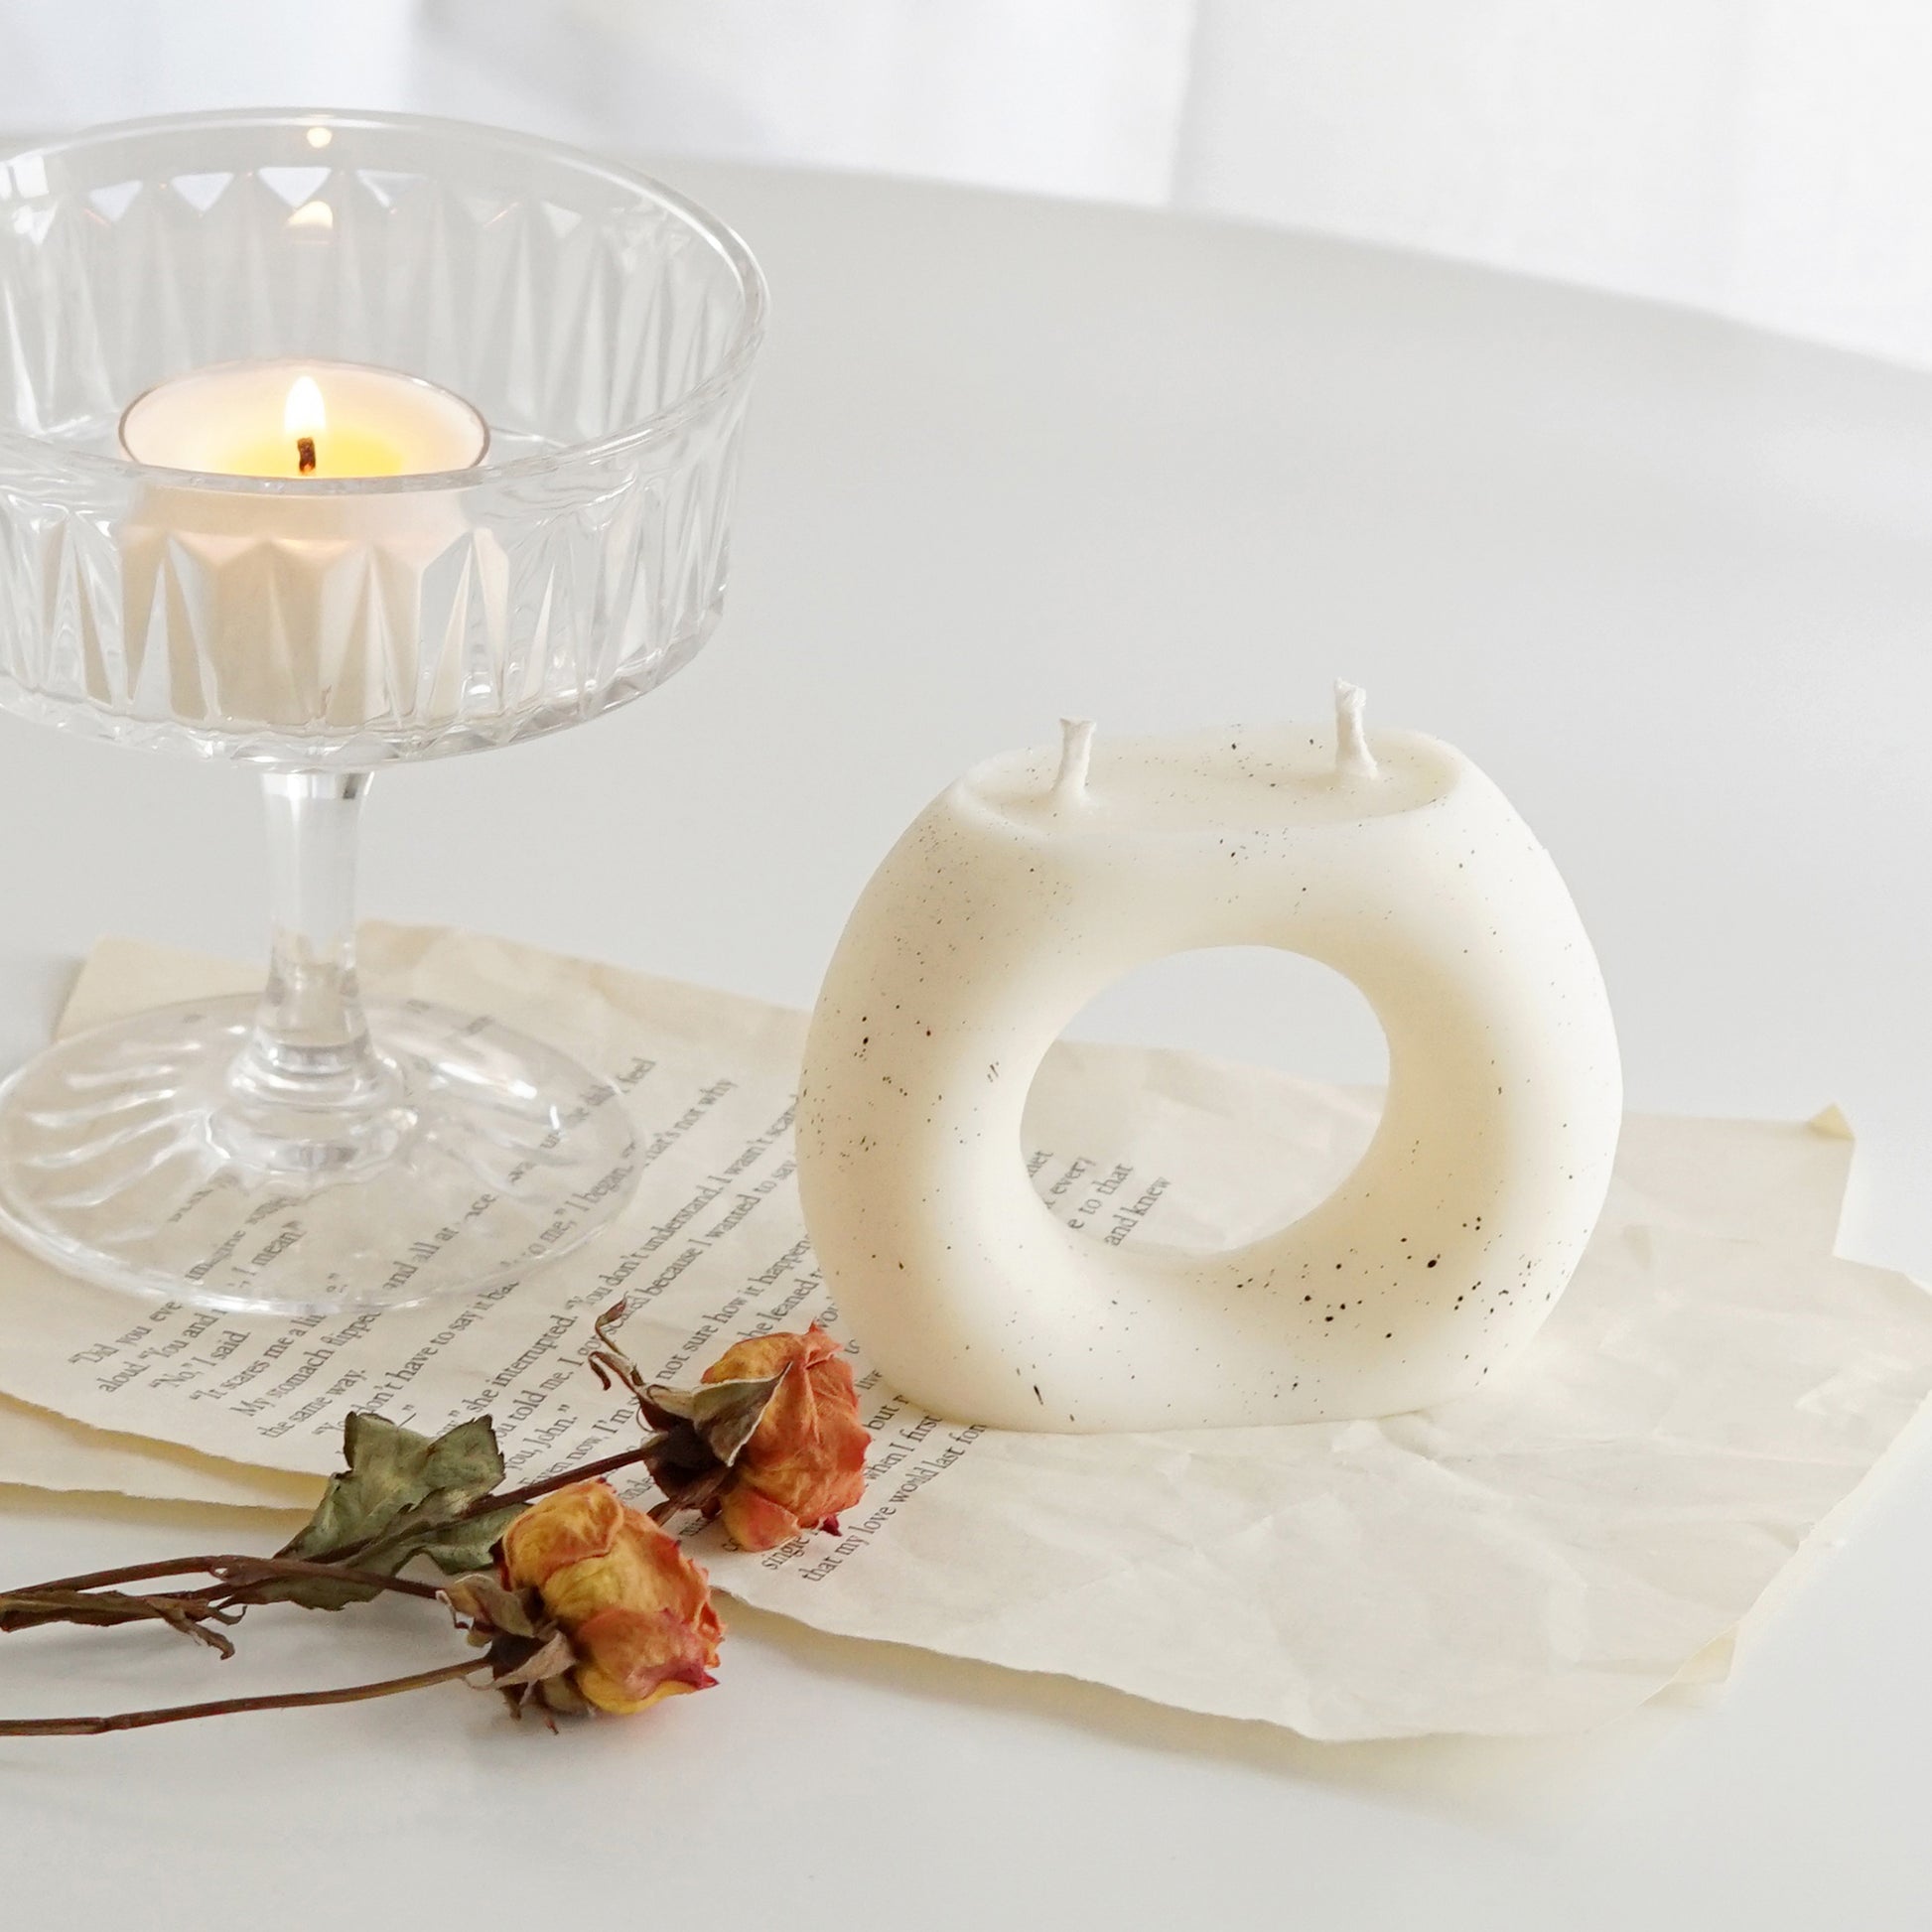 a dotted ring donut shaped white soy pillar candle, yellow orange rose dried flowers, and a lit tealight candle in a glass coupe placed on book pages on white round table